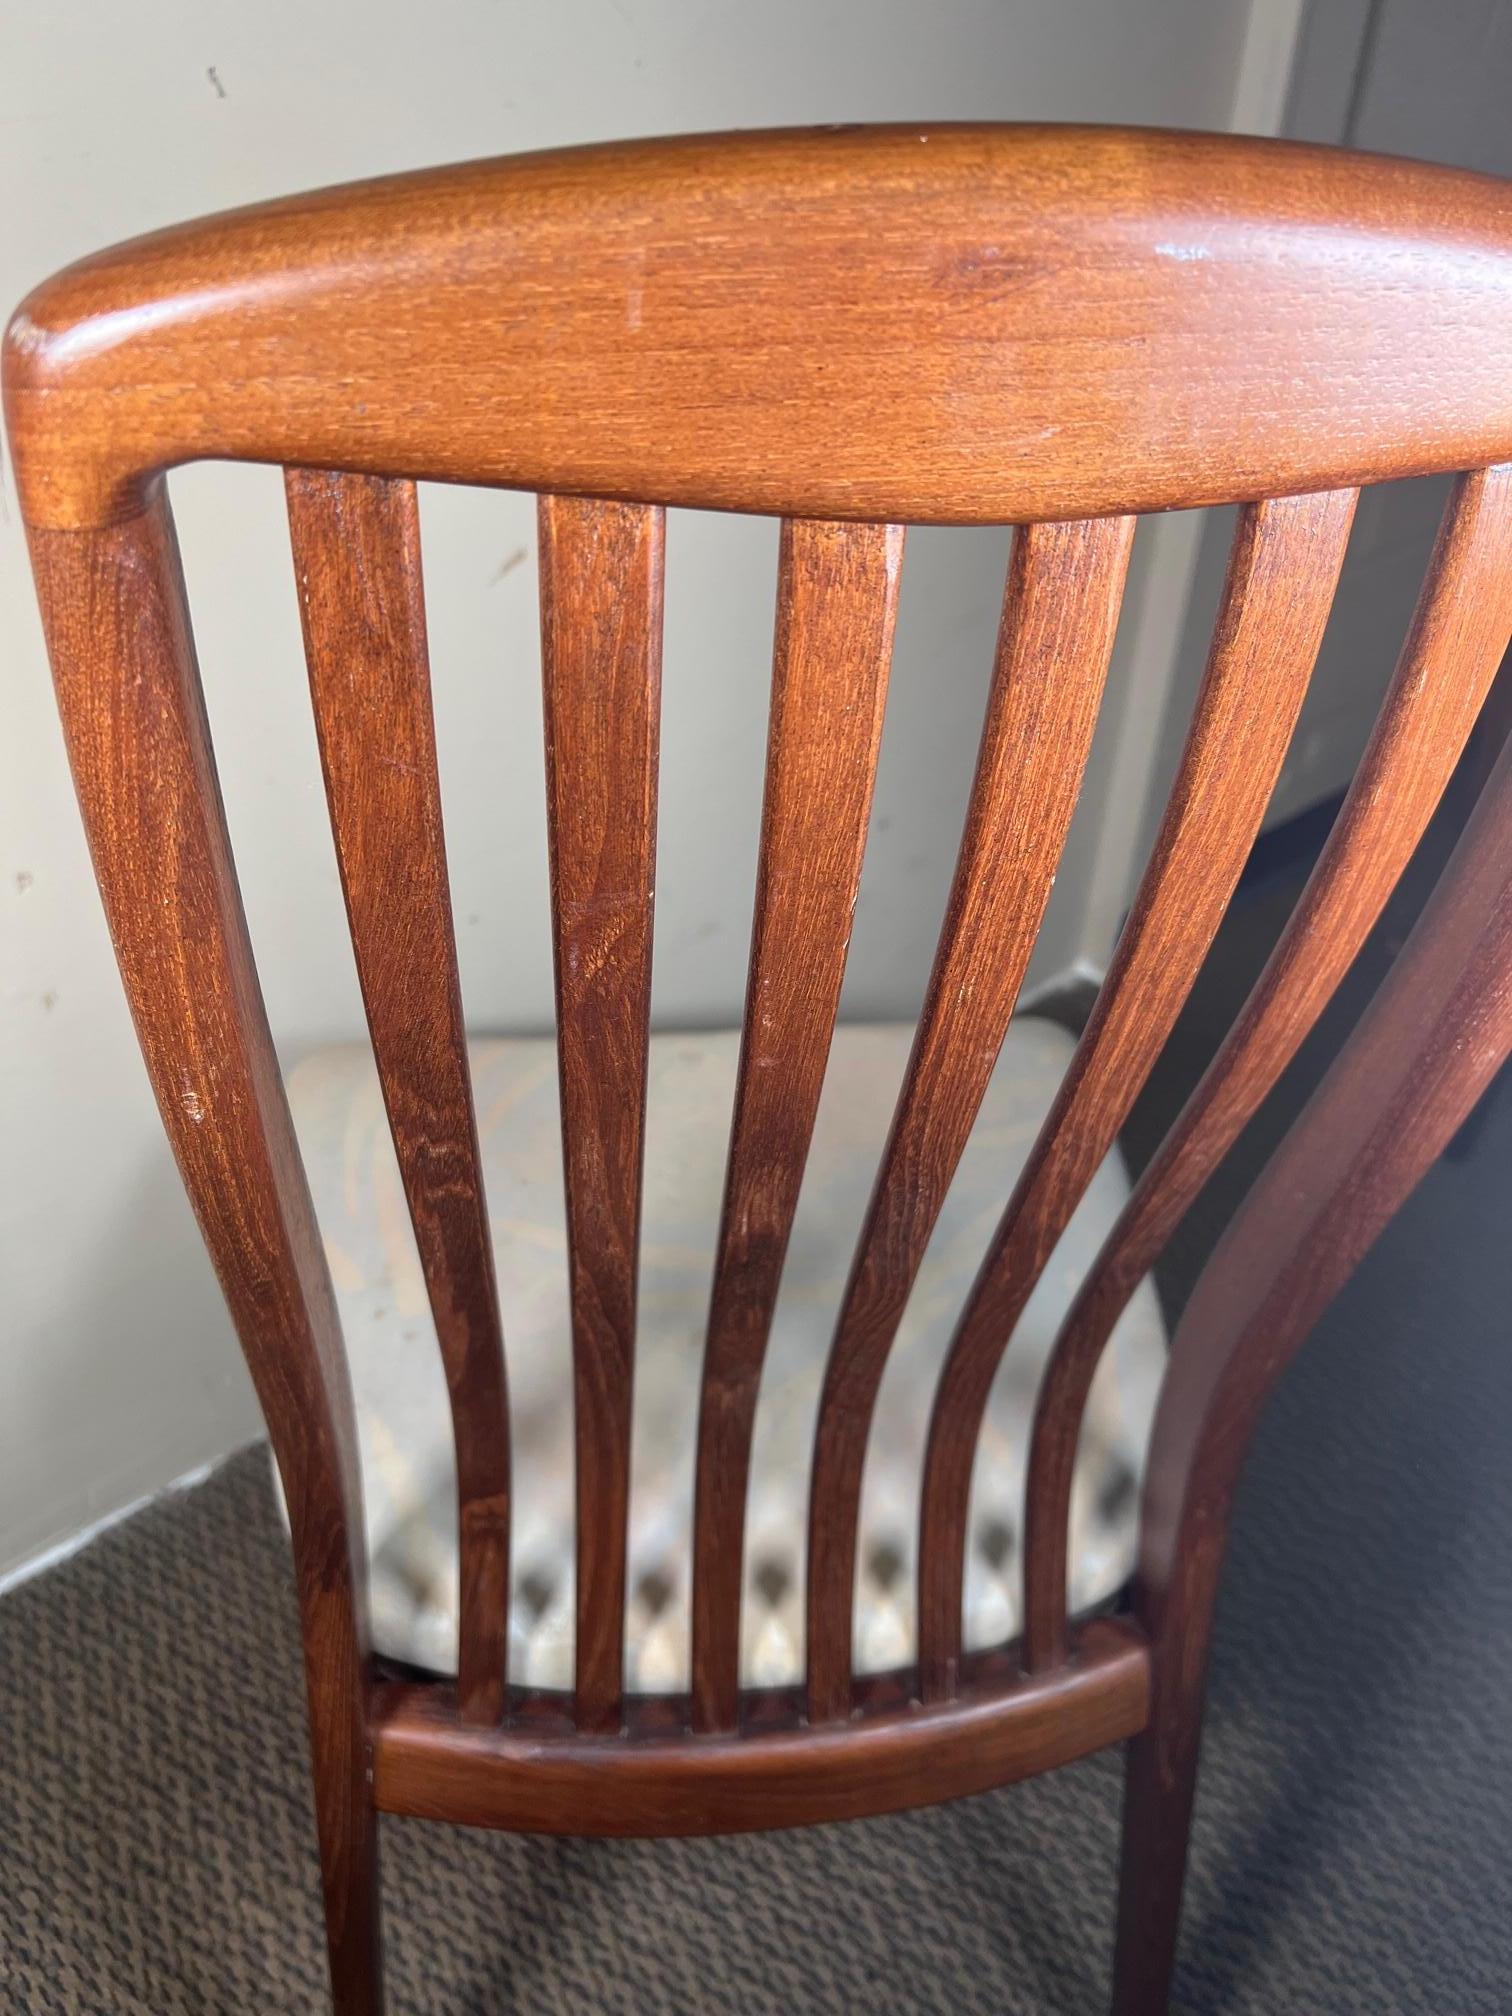 4 Danish Mid Century Modern Dining Chairs by Schou Andersen Slat Back Mahogany In Good Condition For Sale In Atlanta, GA